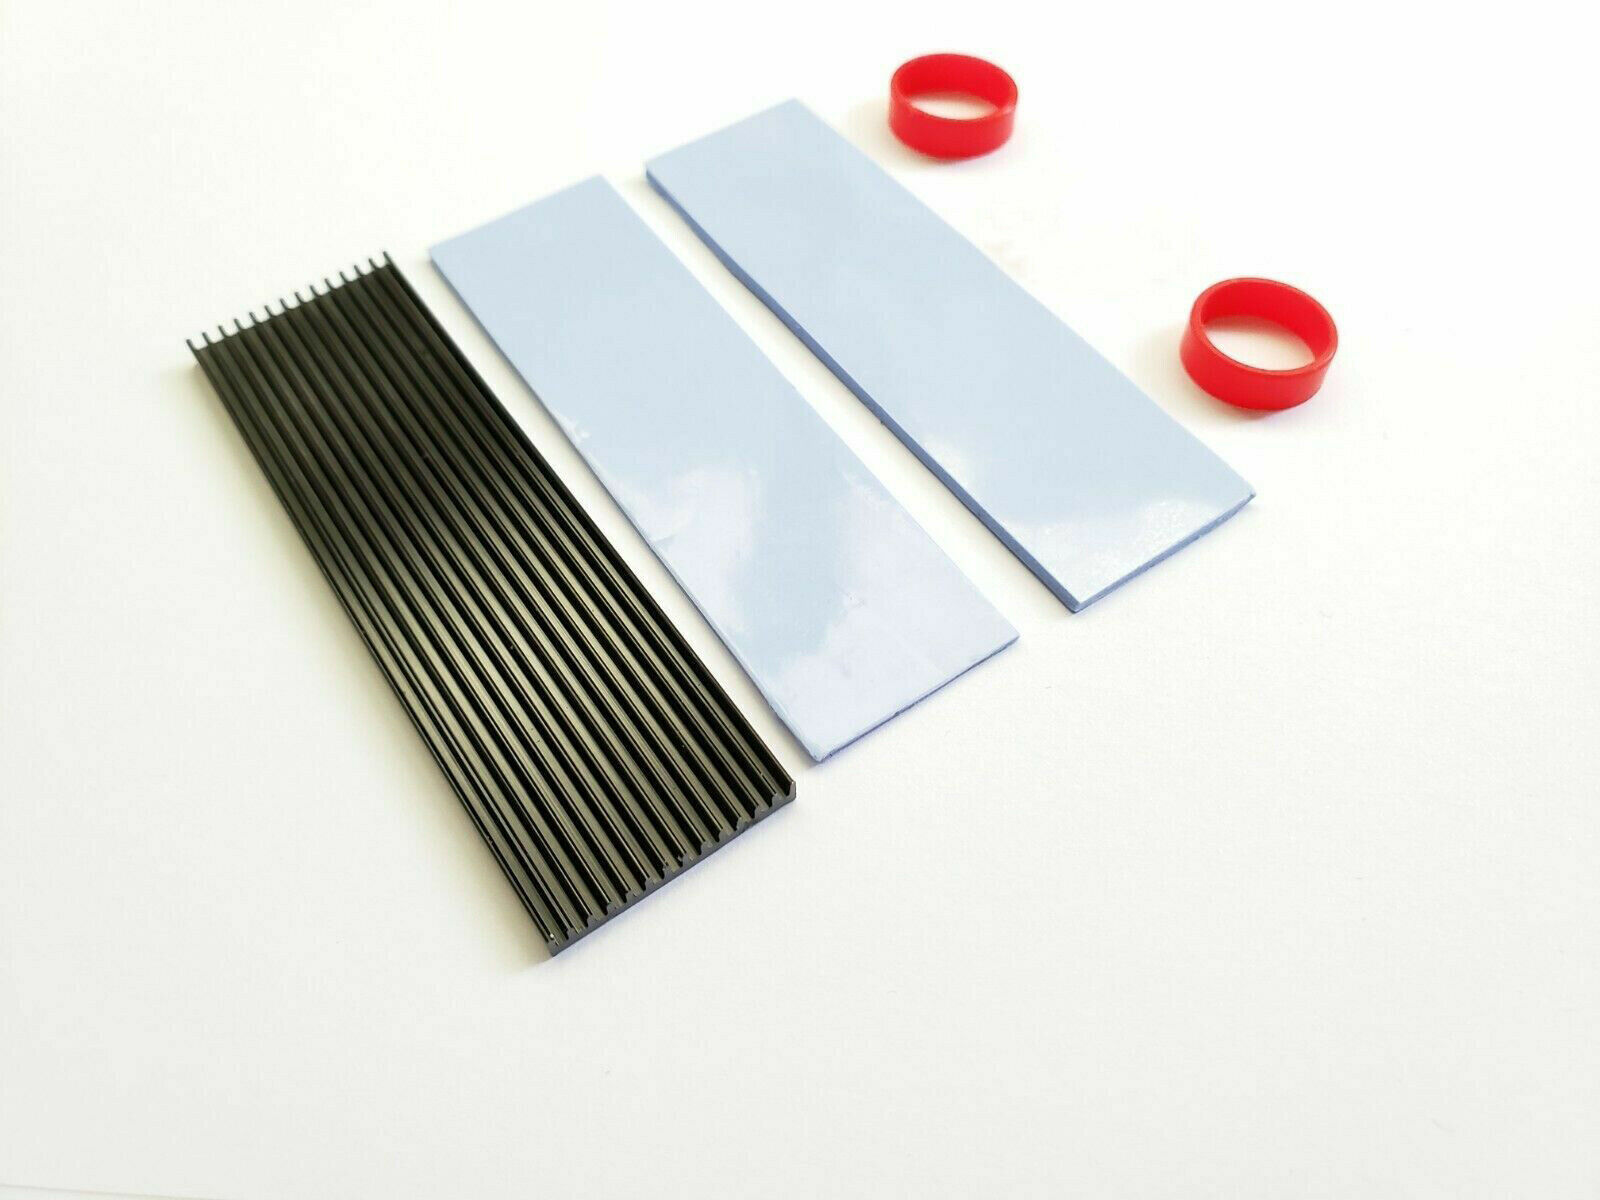 M.2 Nvme Ssd Aluminum Radiator Fin Heatsink Cooler With Thermal Pads 70*20*3mm